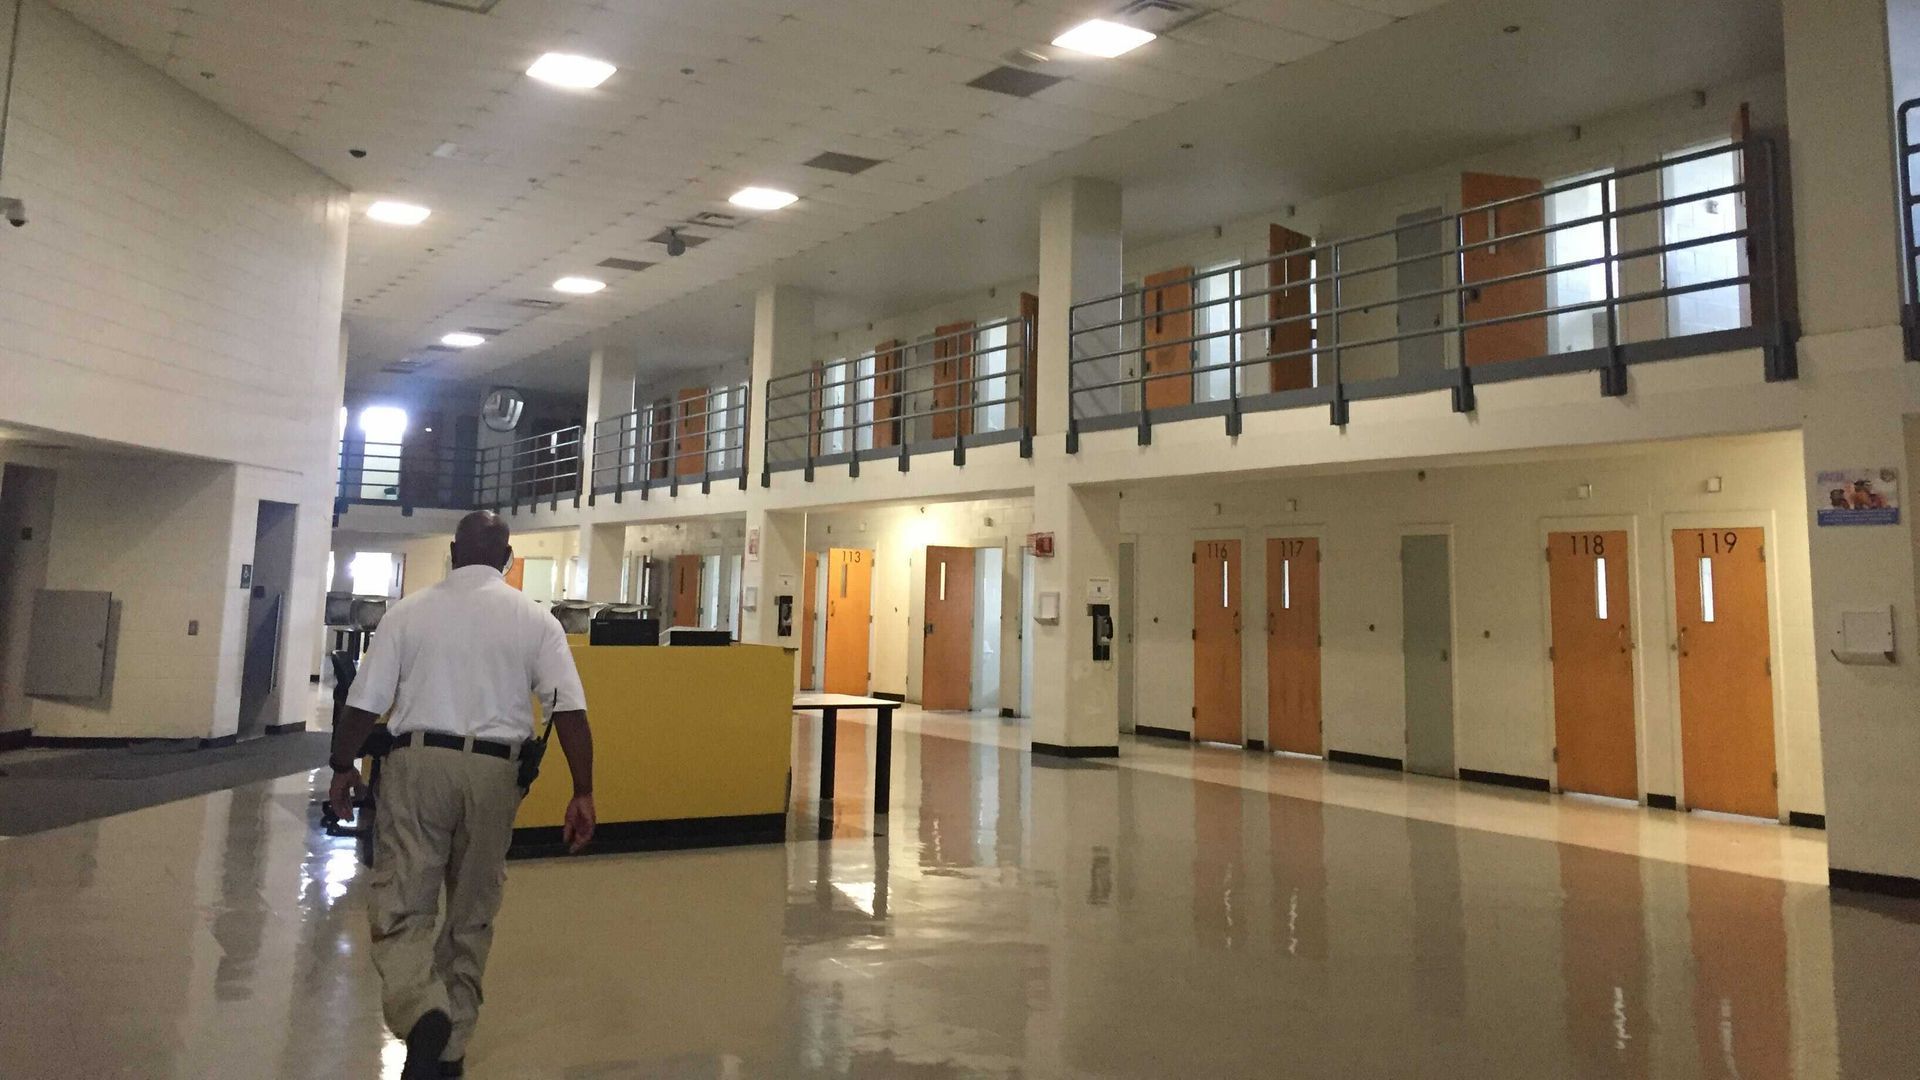 A man walks in a bright and empty cell block in the Atlanta city jail